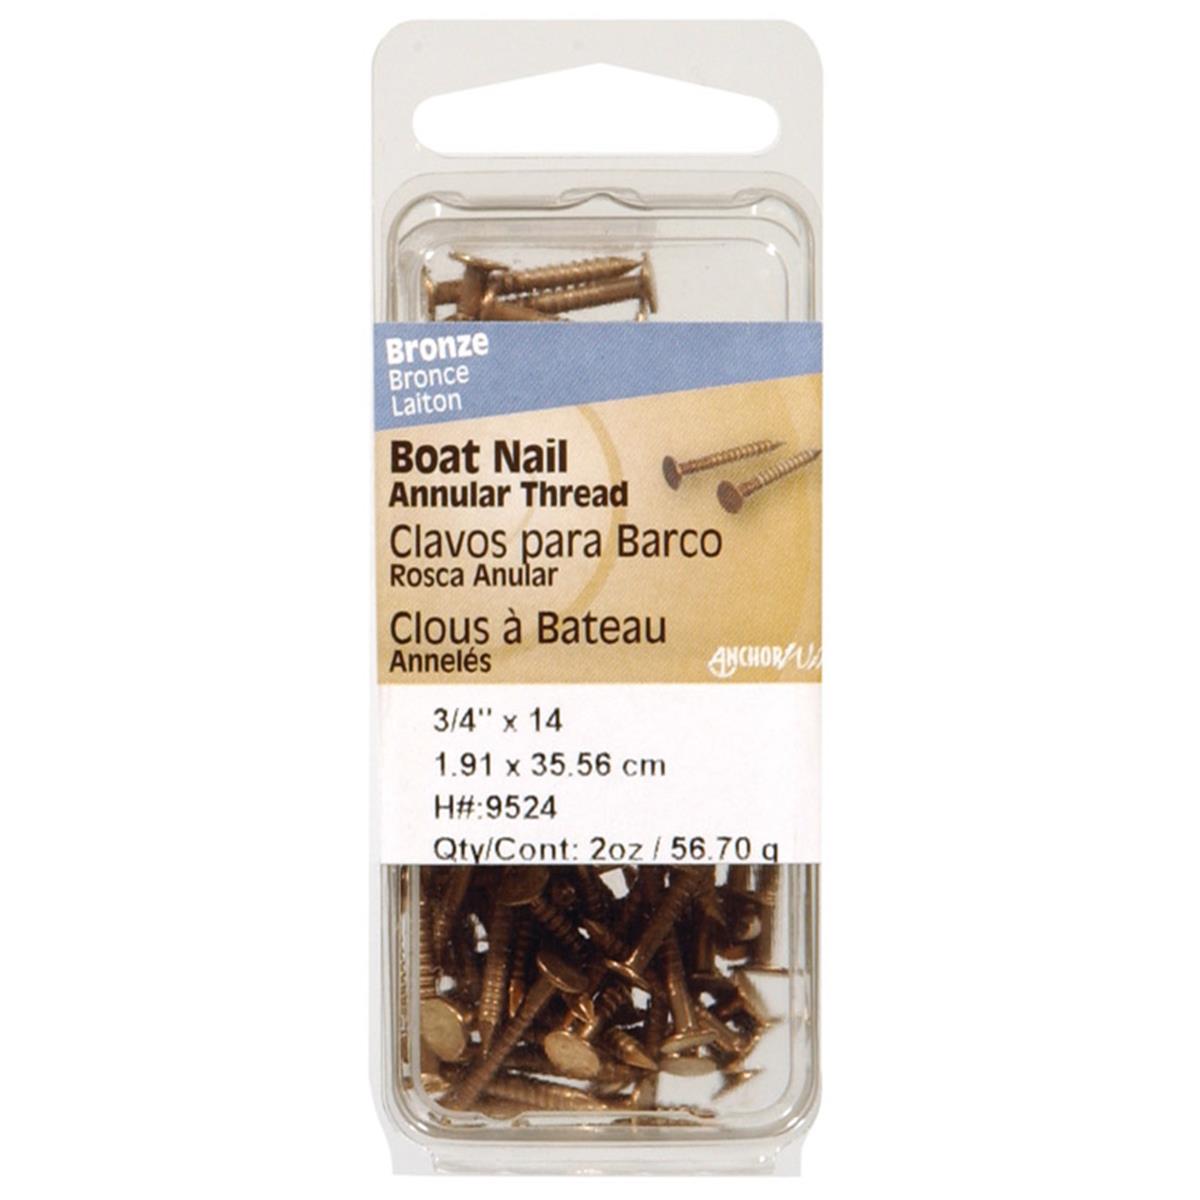 9525 1 X 14 Bronze 2 Oz Boat Nail- Pack Of 6